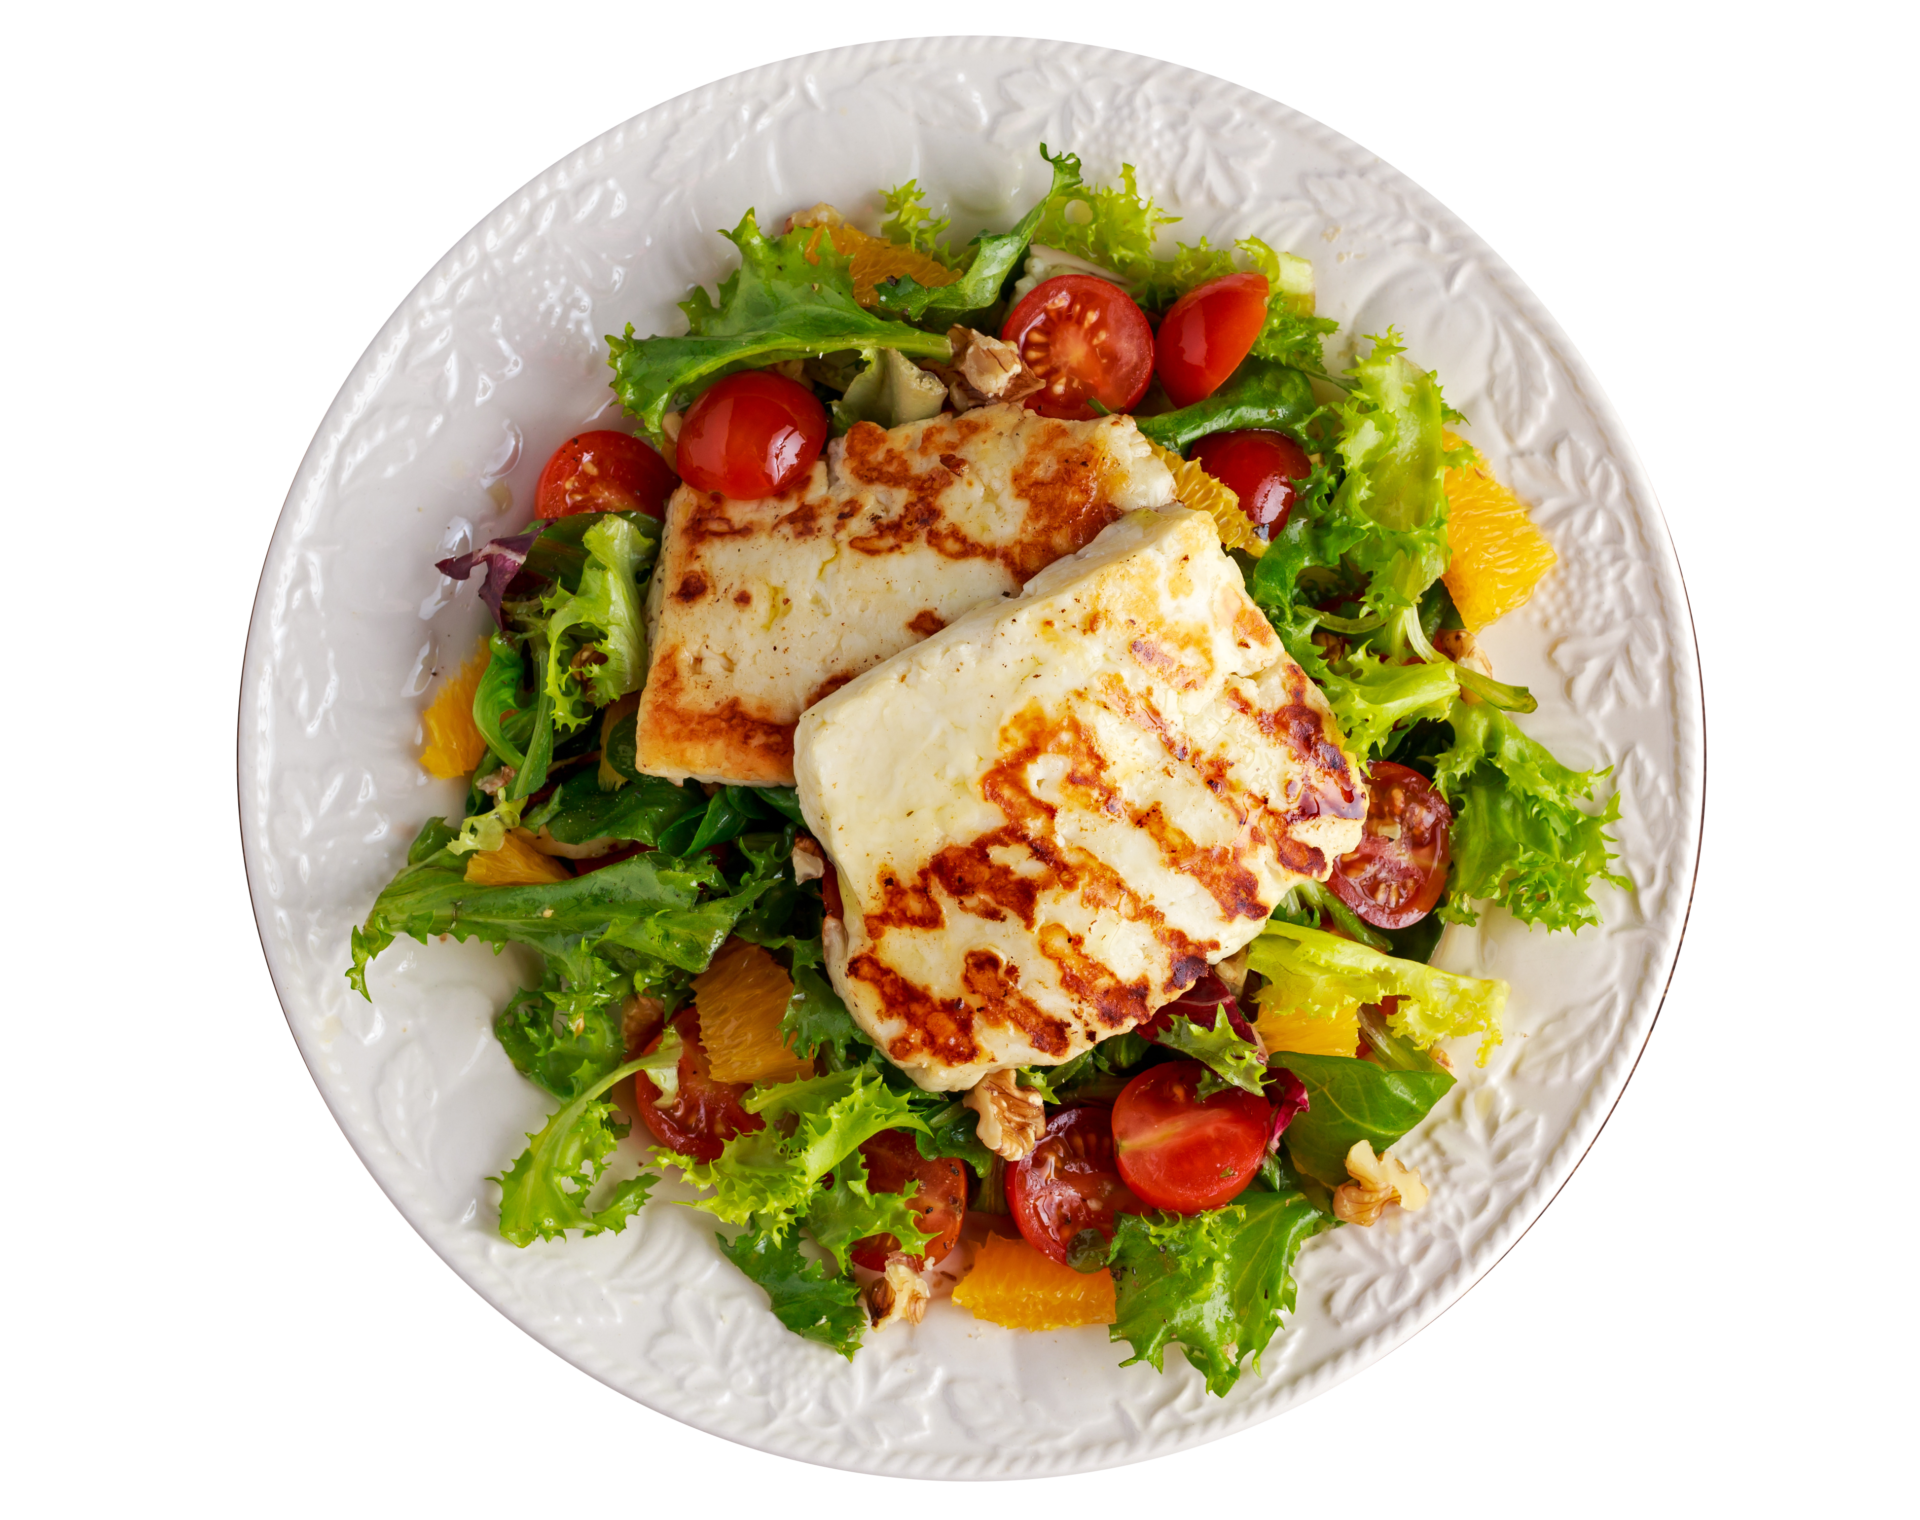 A light salad with Grikios grill cheese and orange